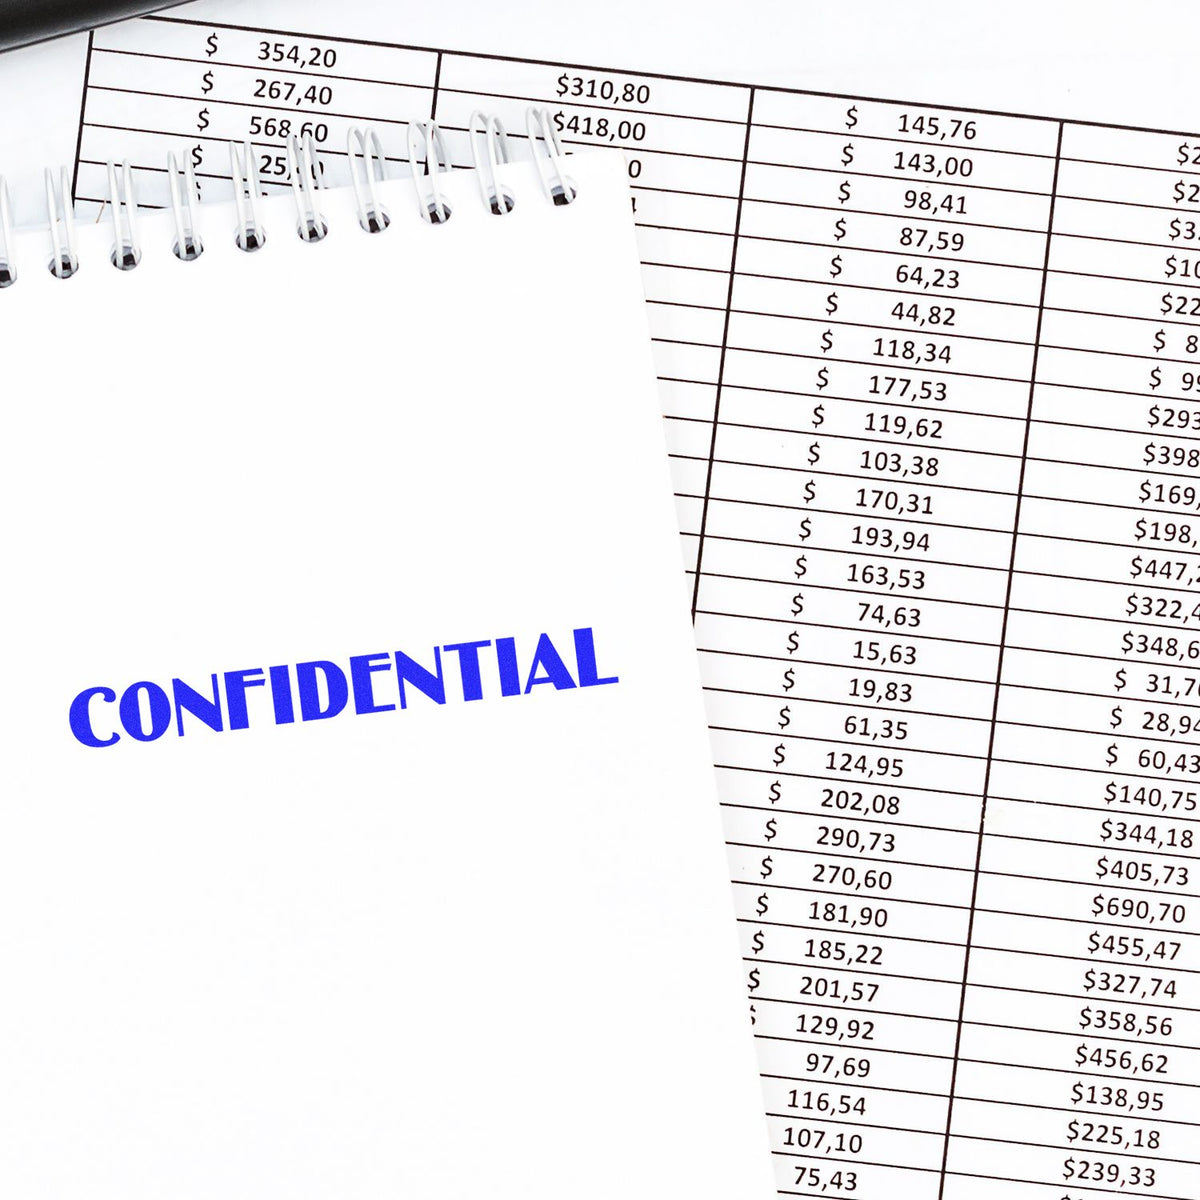 Large Self-Inking Optima Confidential Stamp In Use Photo